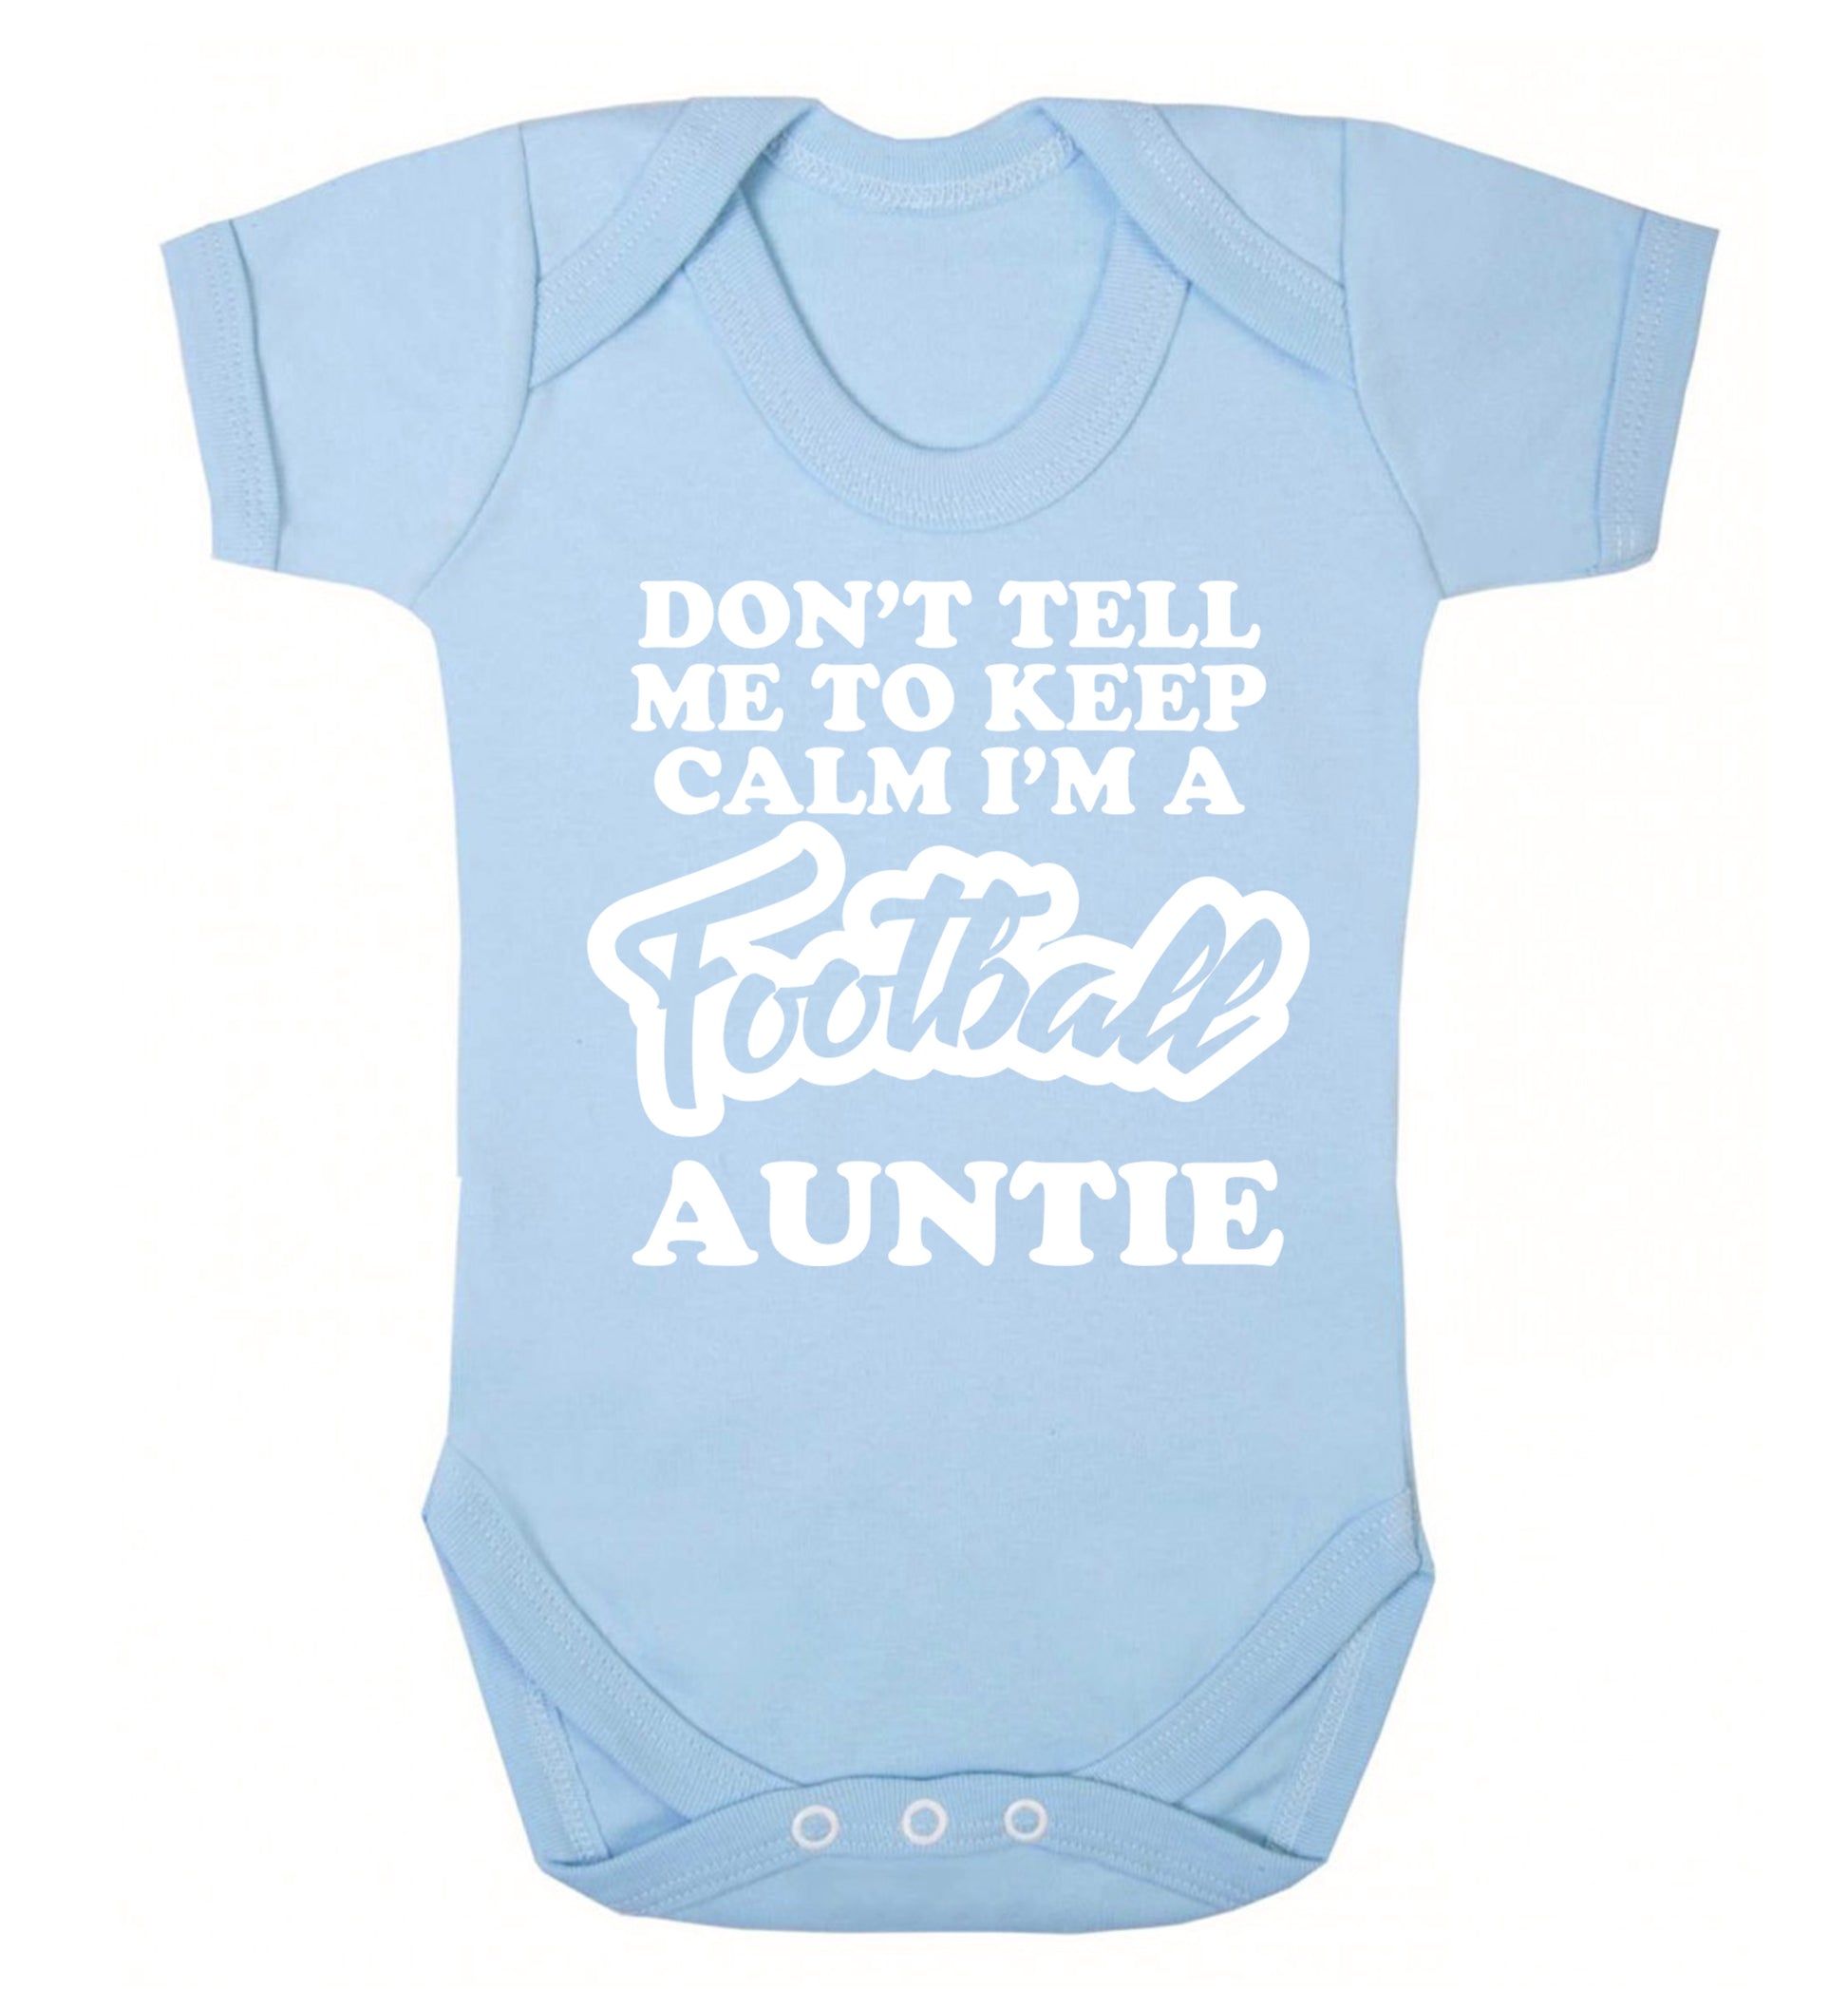 Don't tell me to keep calm I'm a football auntie Baby Vest pale blue 18-24 months